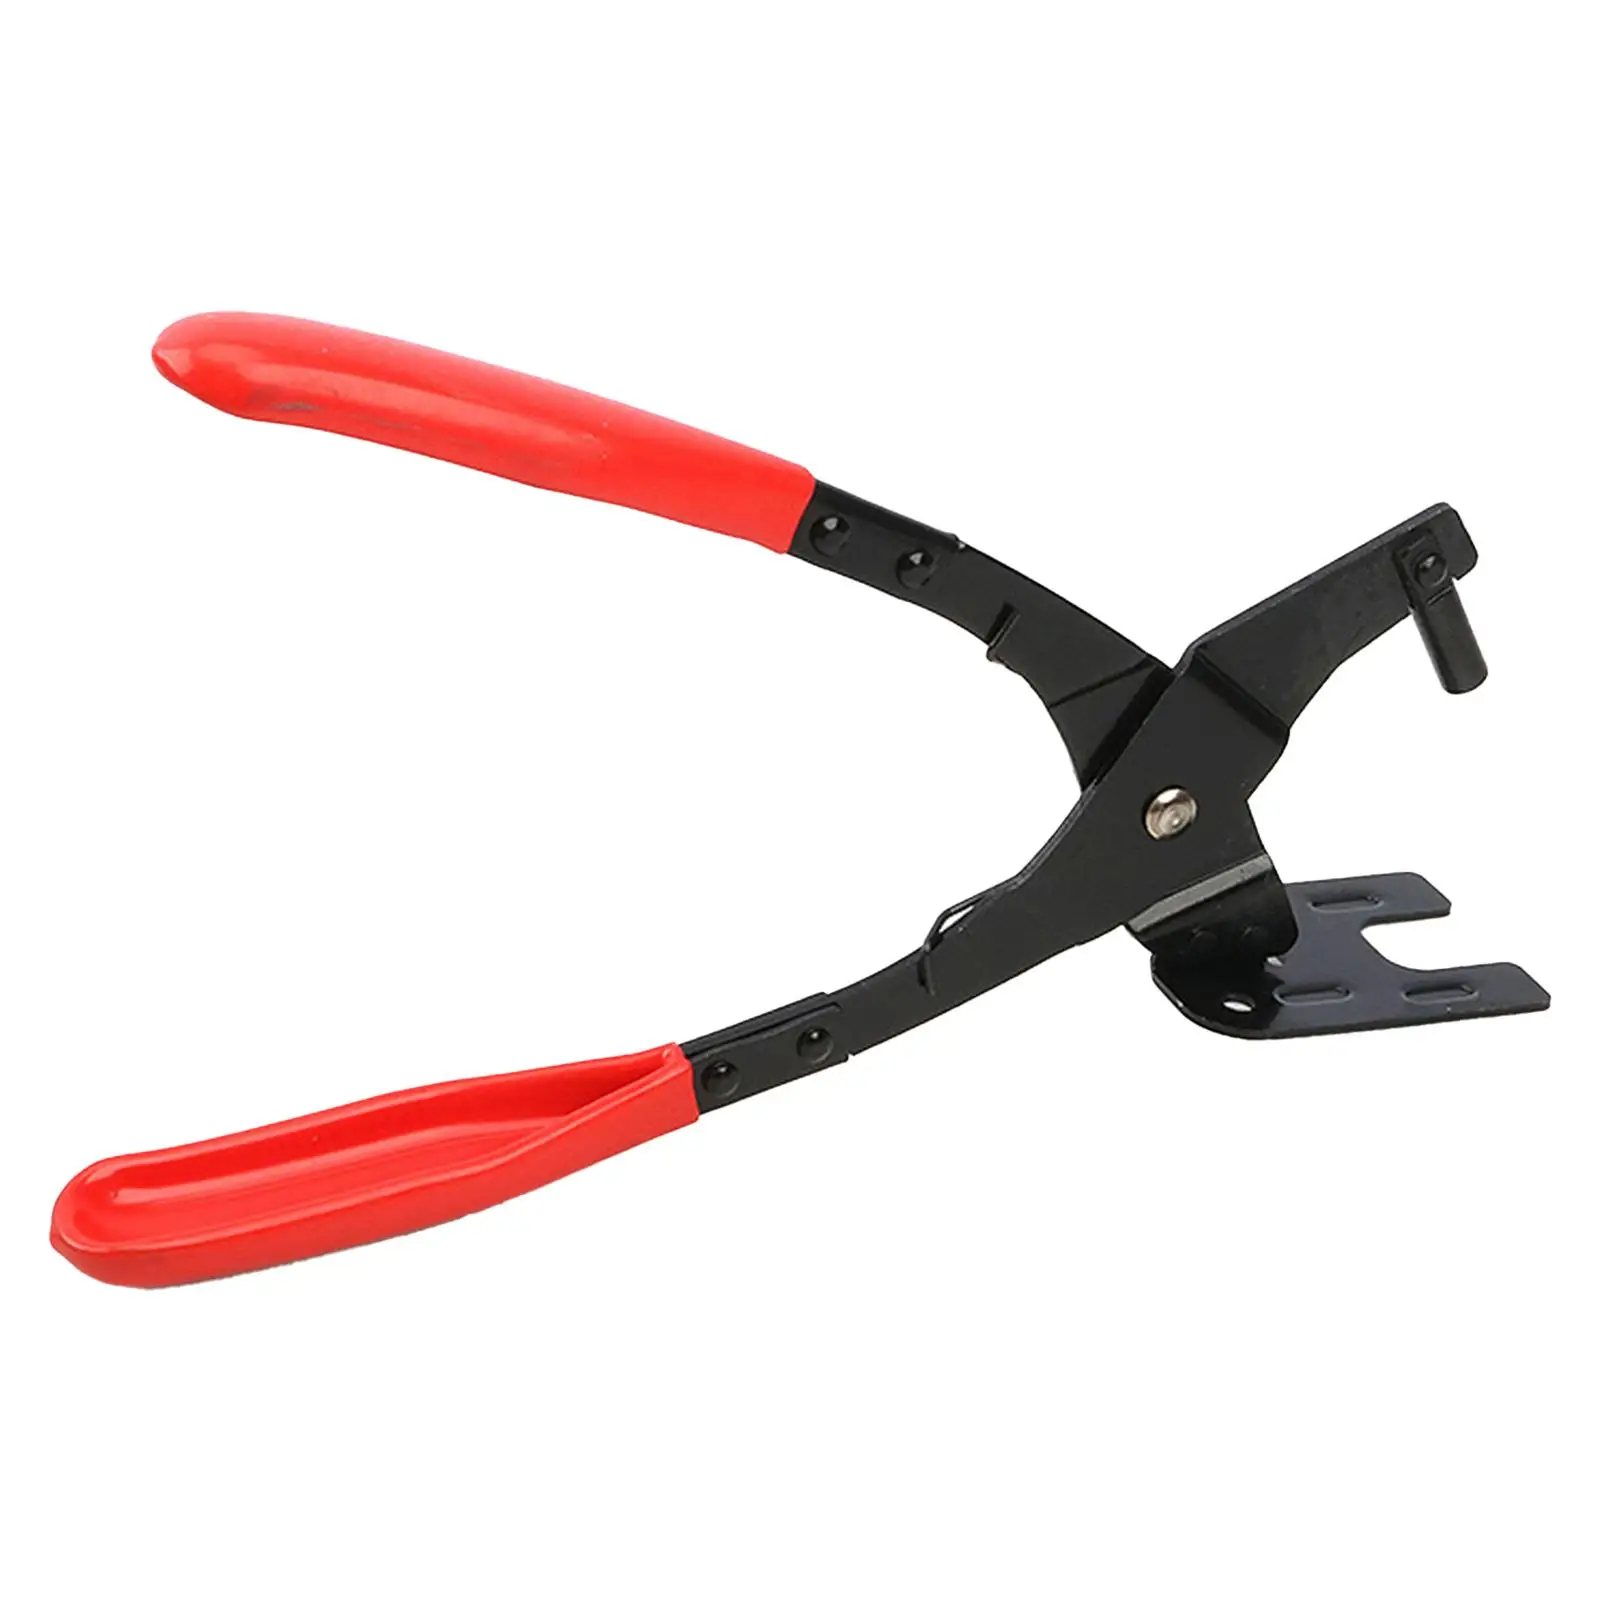 Car Exhaust Hanger Removal Pliers Hand Operated Tools Exhaust Grommet Pulling Pliers Compatible with All Exhaust Rubber Hangers